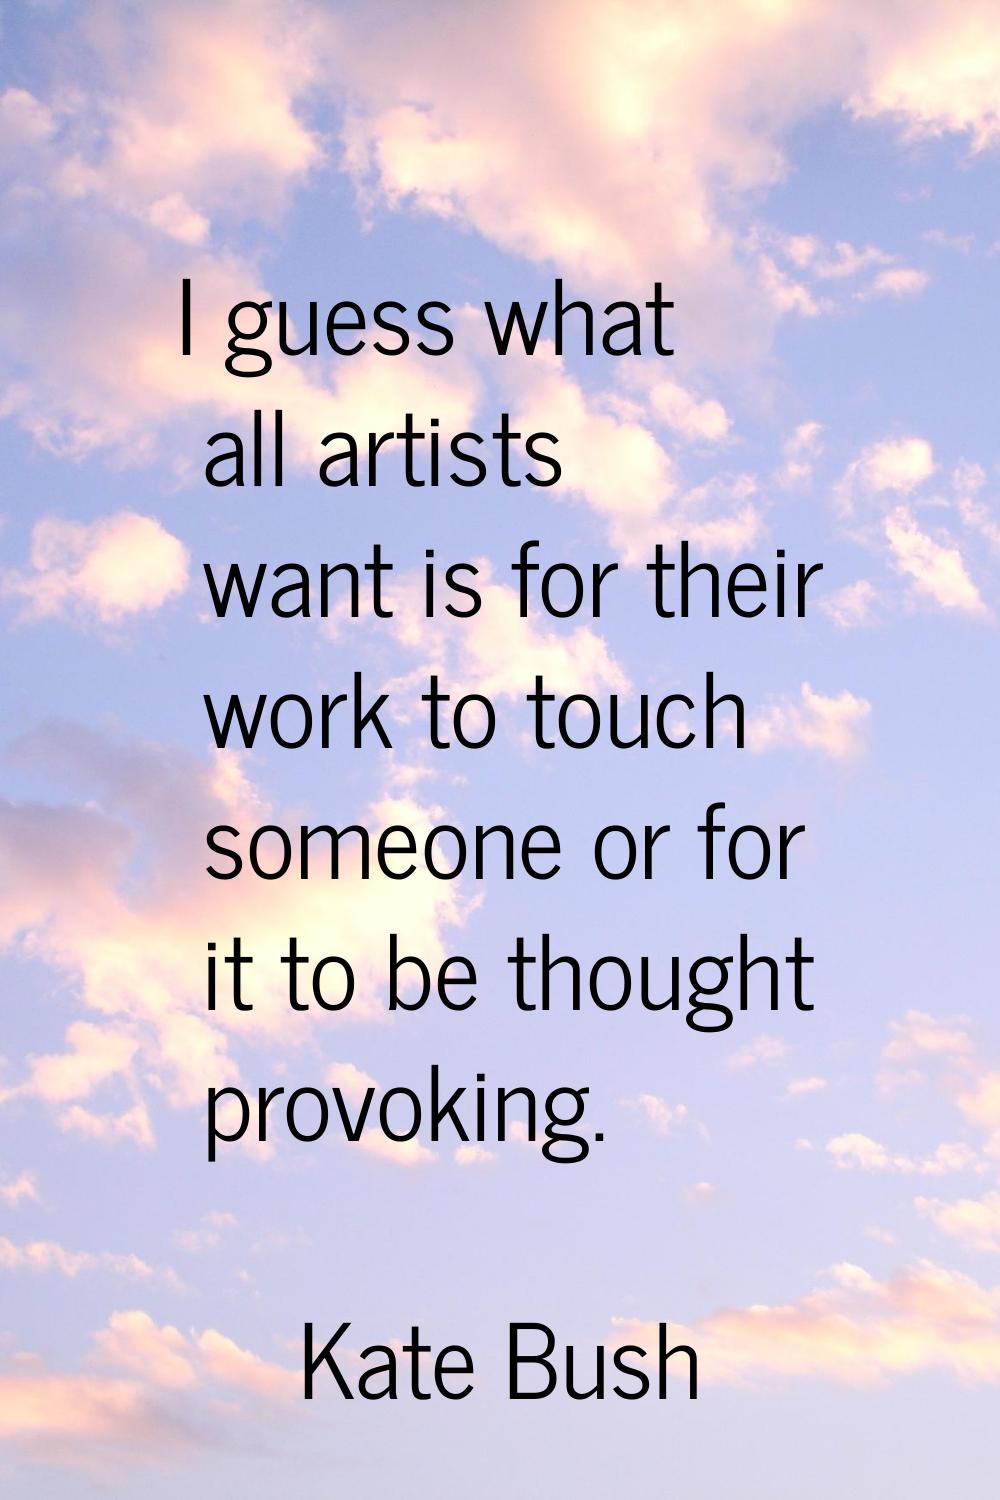 I guess what all artists want is for their work to touch someone or for it to be thought provoking.